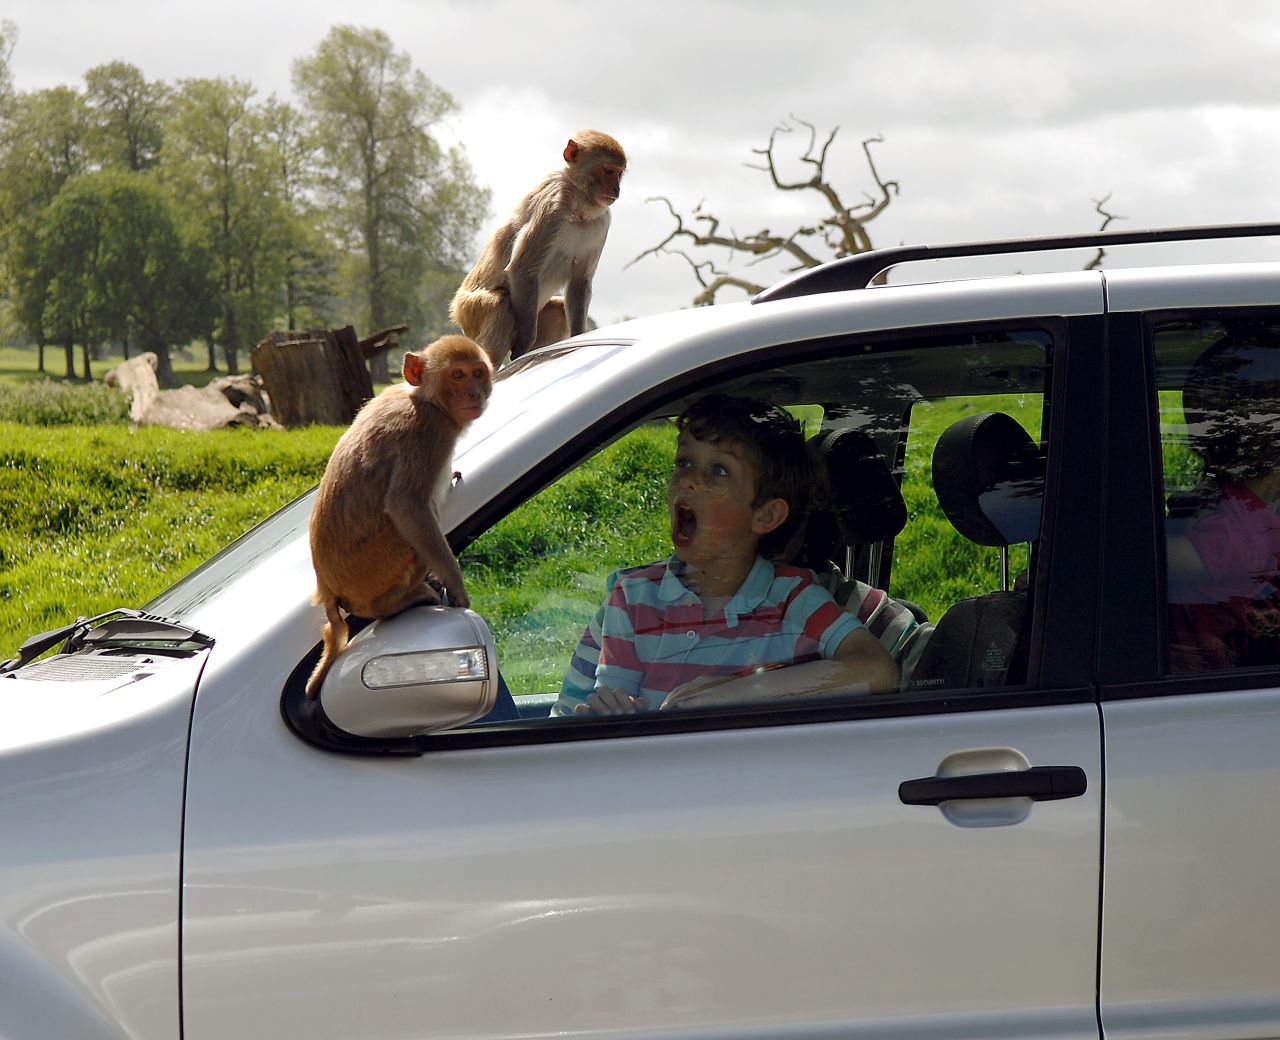 Longleat's troupe of rhesus macaques love climbing on cars and surprising visitors. 